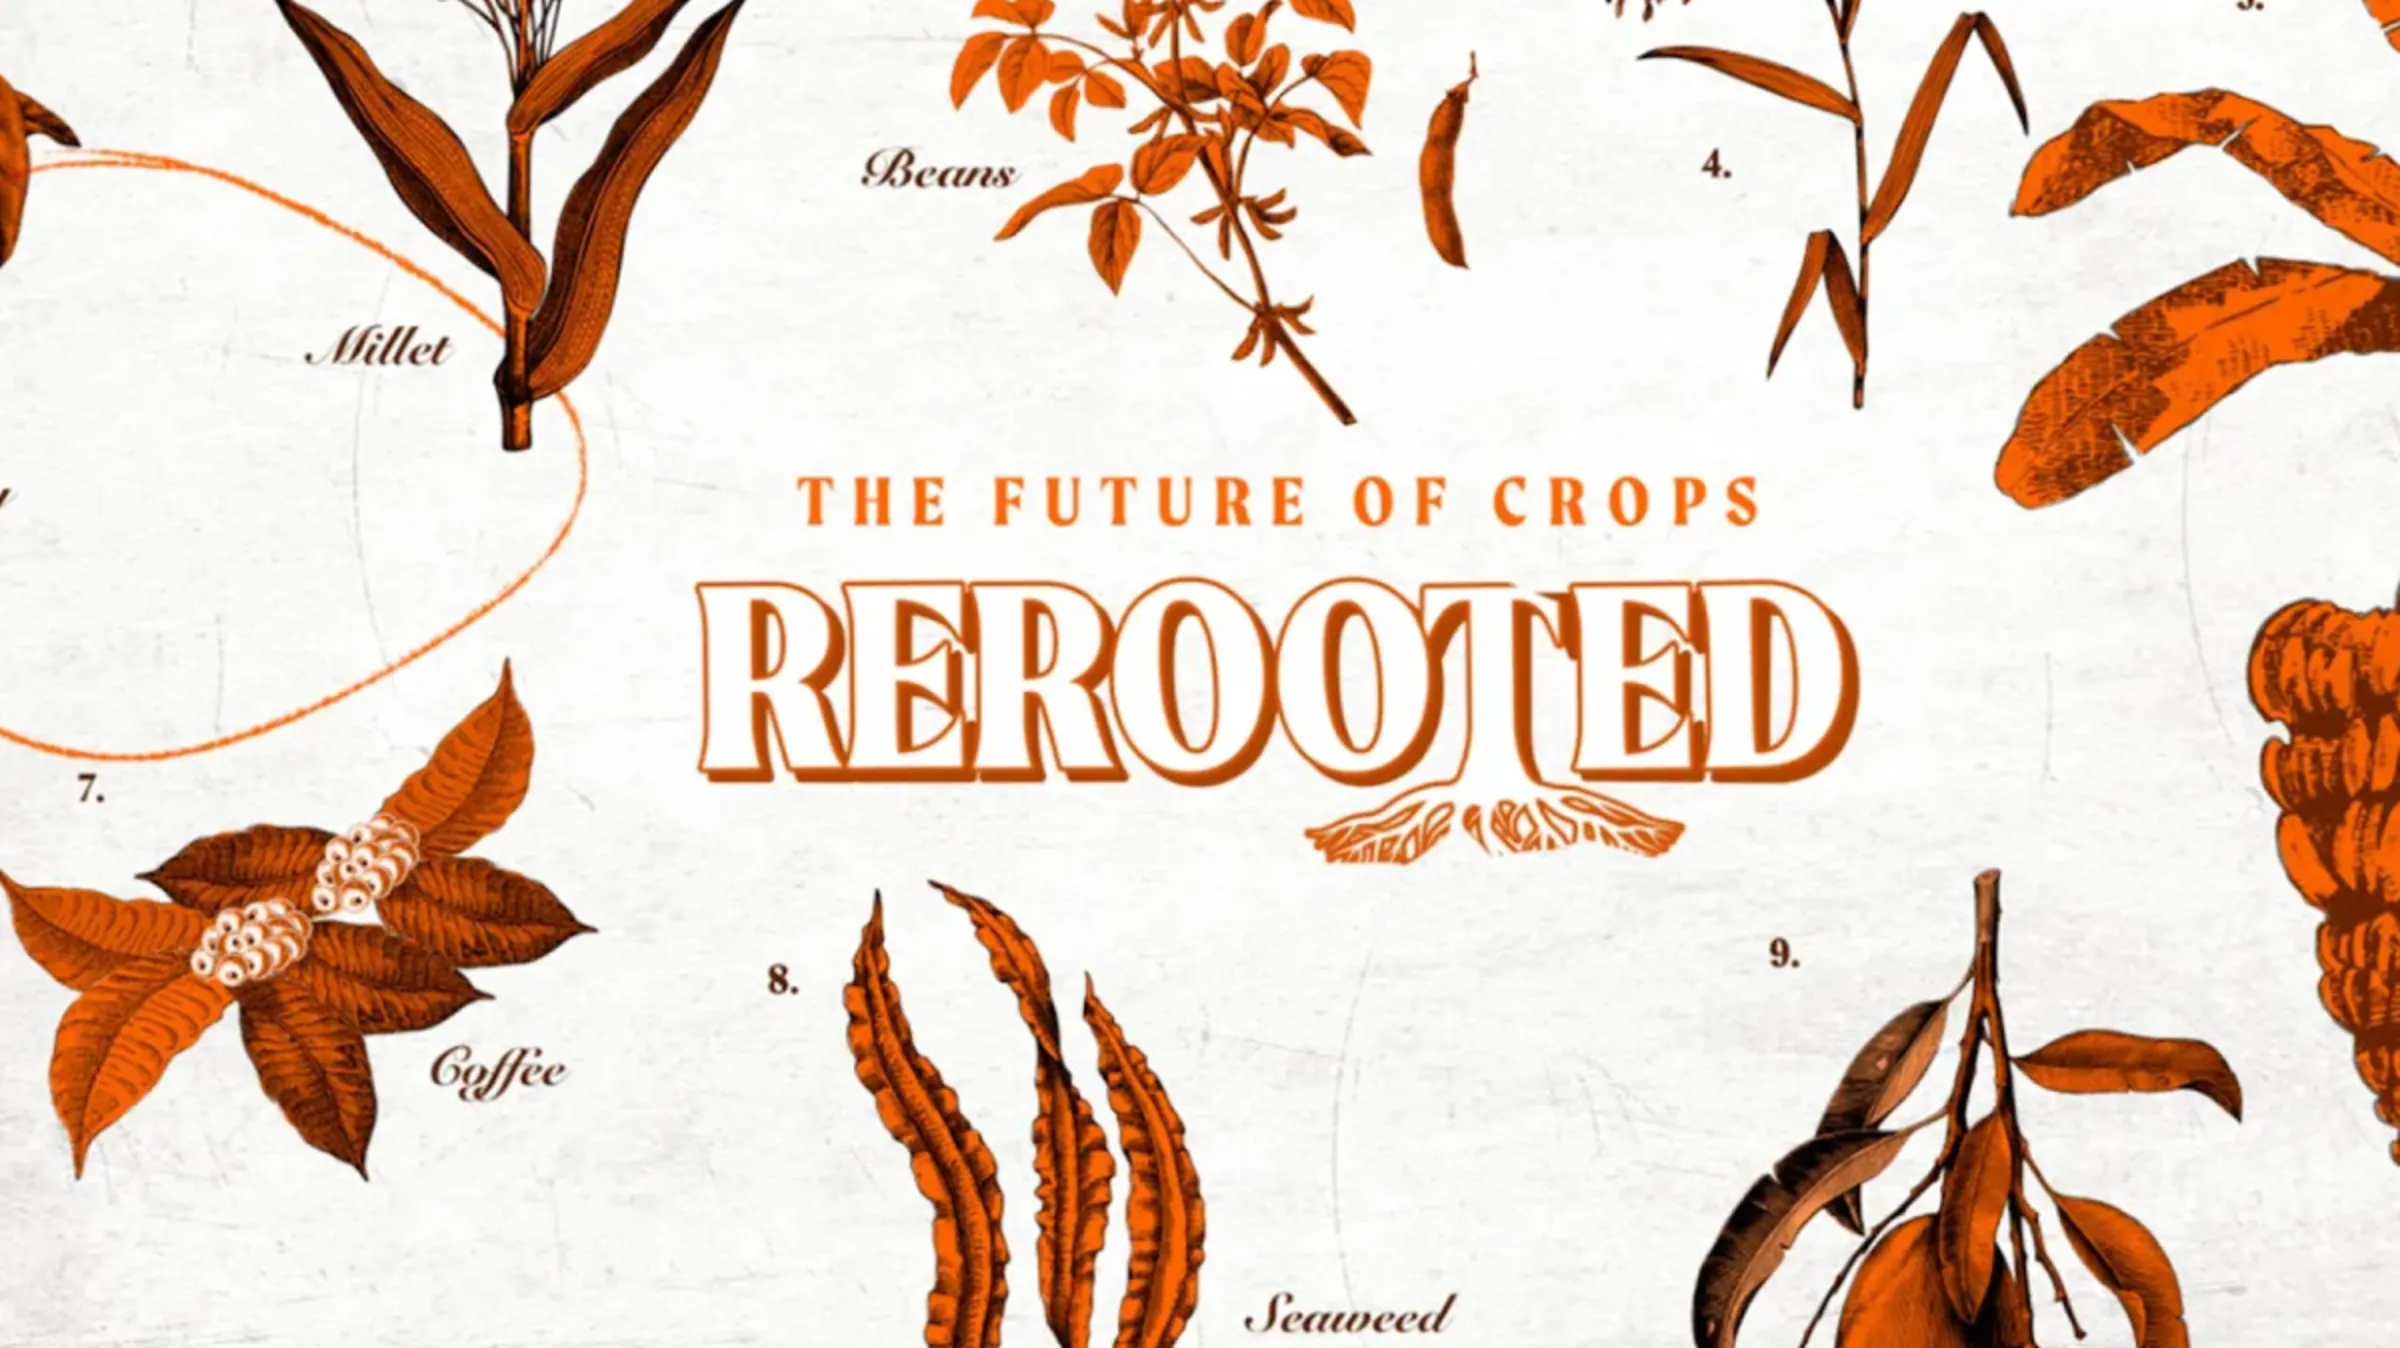 Crops including coffee and rice are shown in orange on white background in this illustration. The text reads: THE FUTURE OF CROPS, REROOTED. Thomson Reuters Foundation/Karif Wat